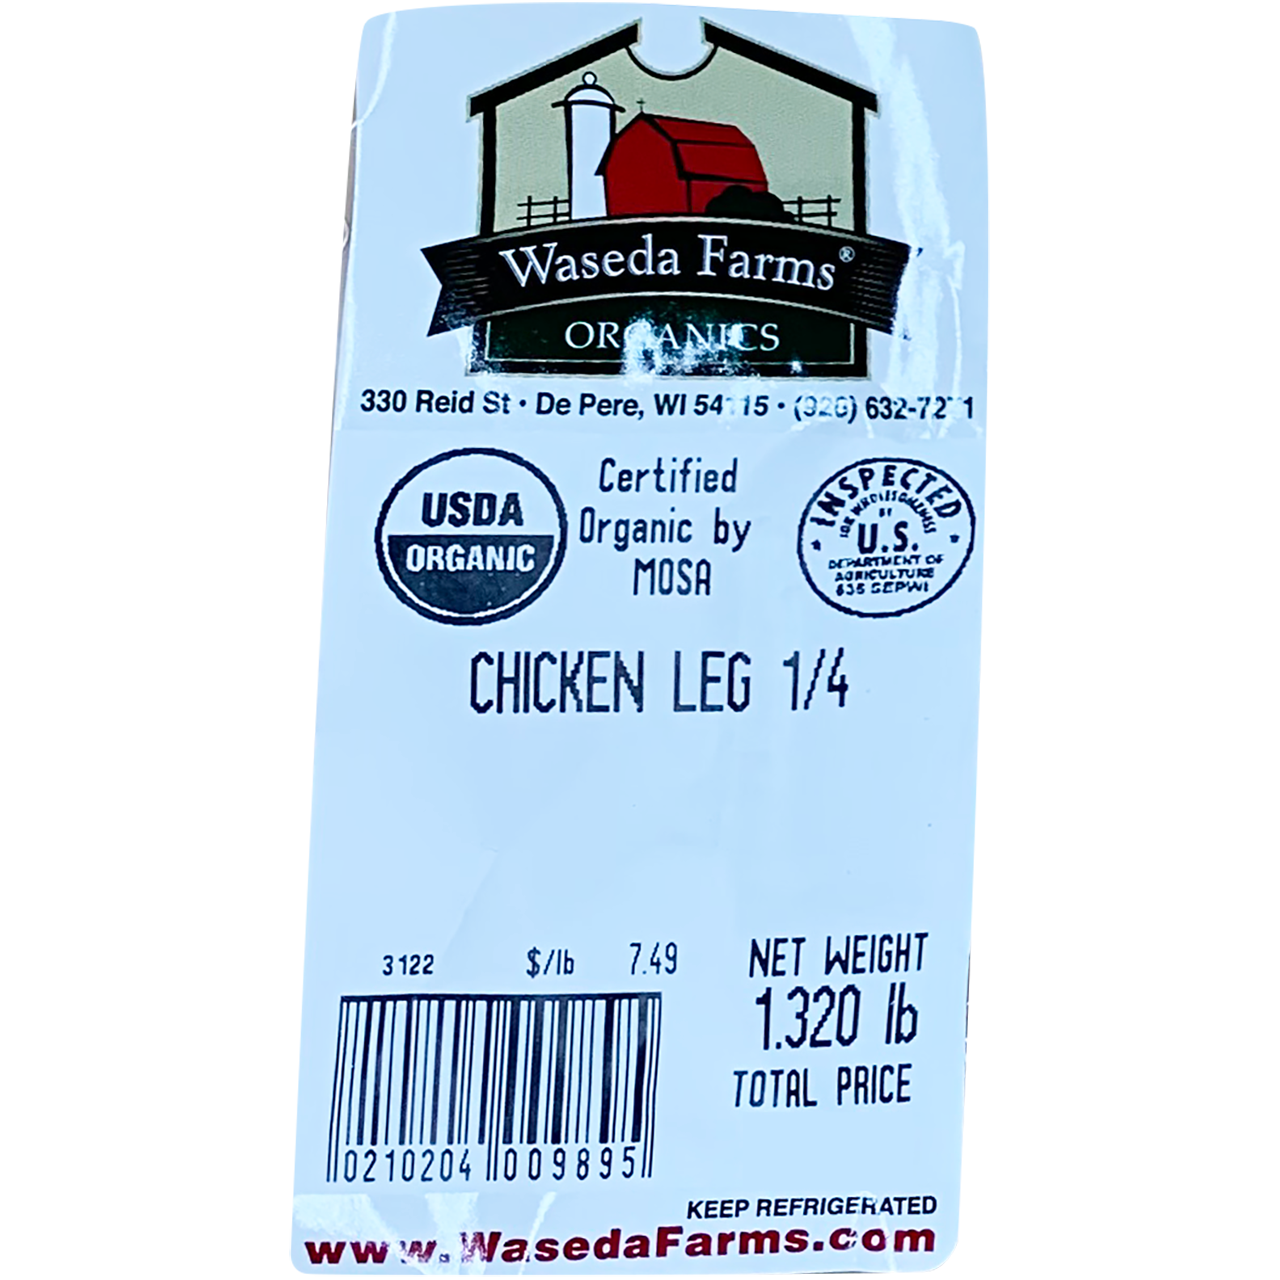 The label for chicken legs from Waseda Farms.